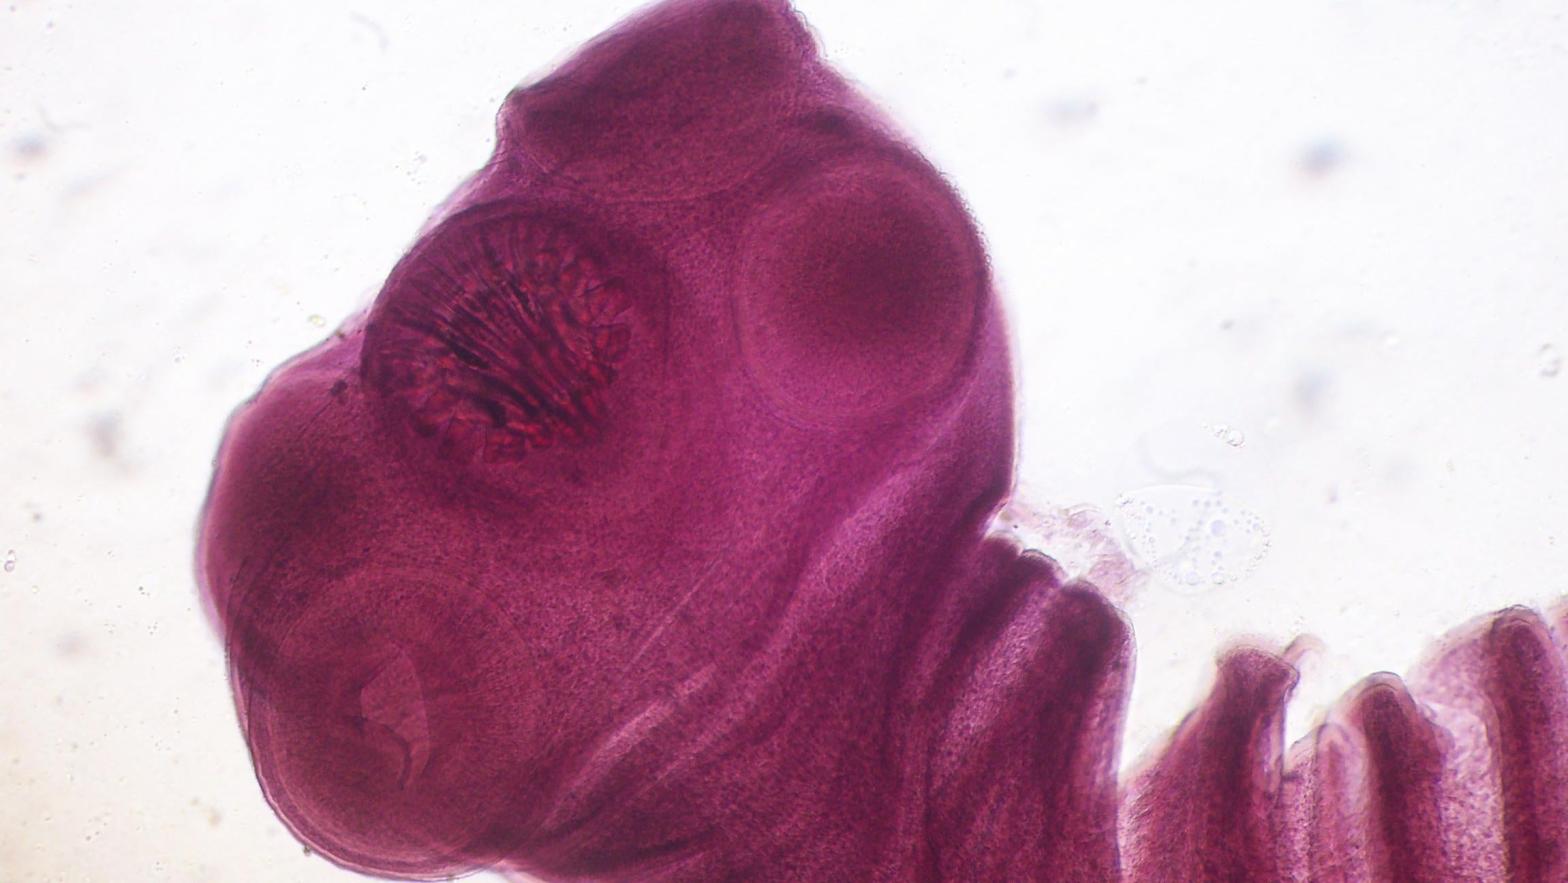 A close-up look at the scolex, or head, of a fully mature pork tapeworm. Interestingly enough, cysticercosis is what happens when the tapeworms don't get the chance to become adults. (Image: Roberto J. Galindo/Wikimedia Commons)